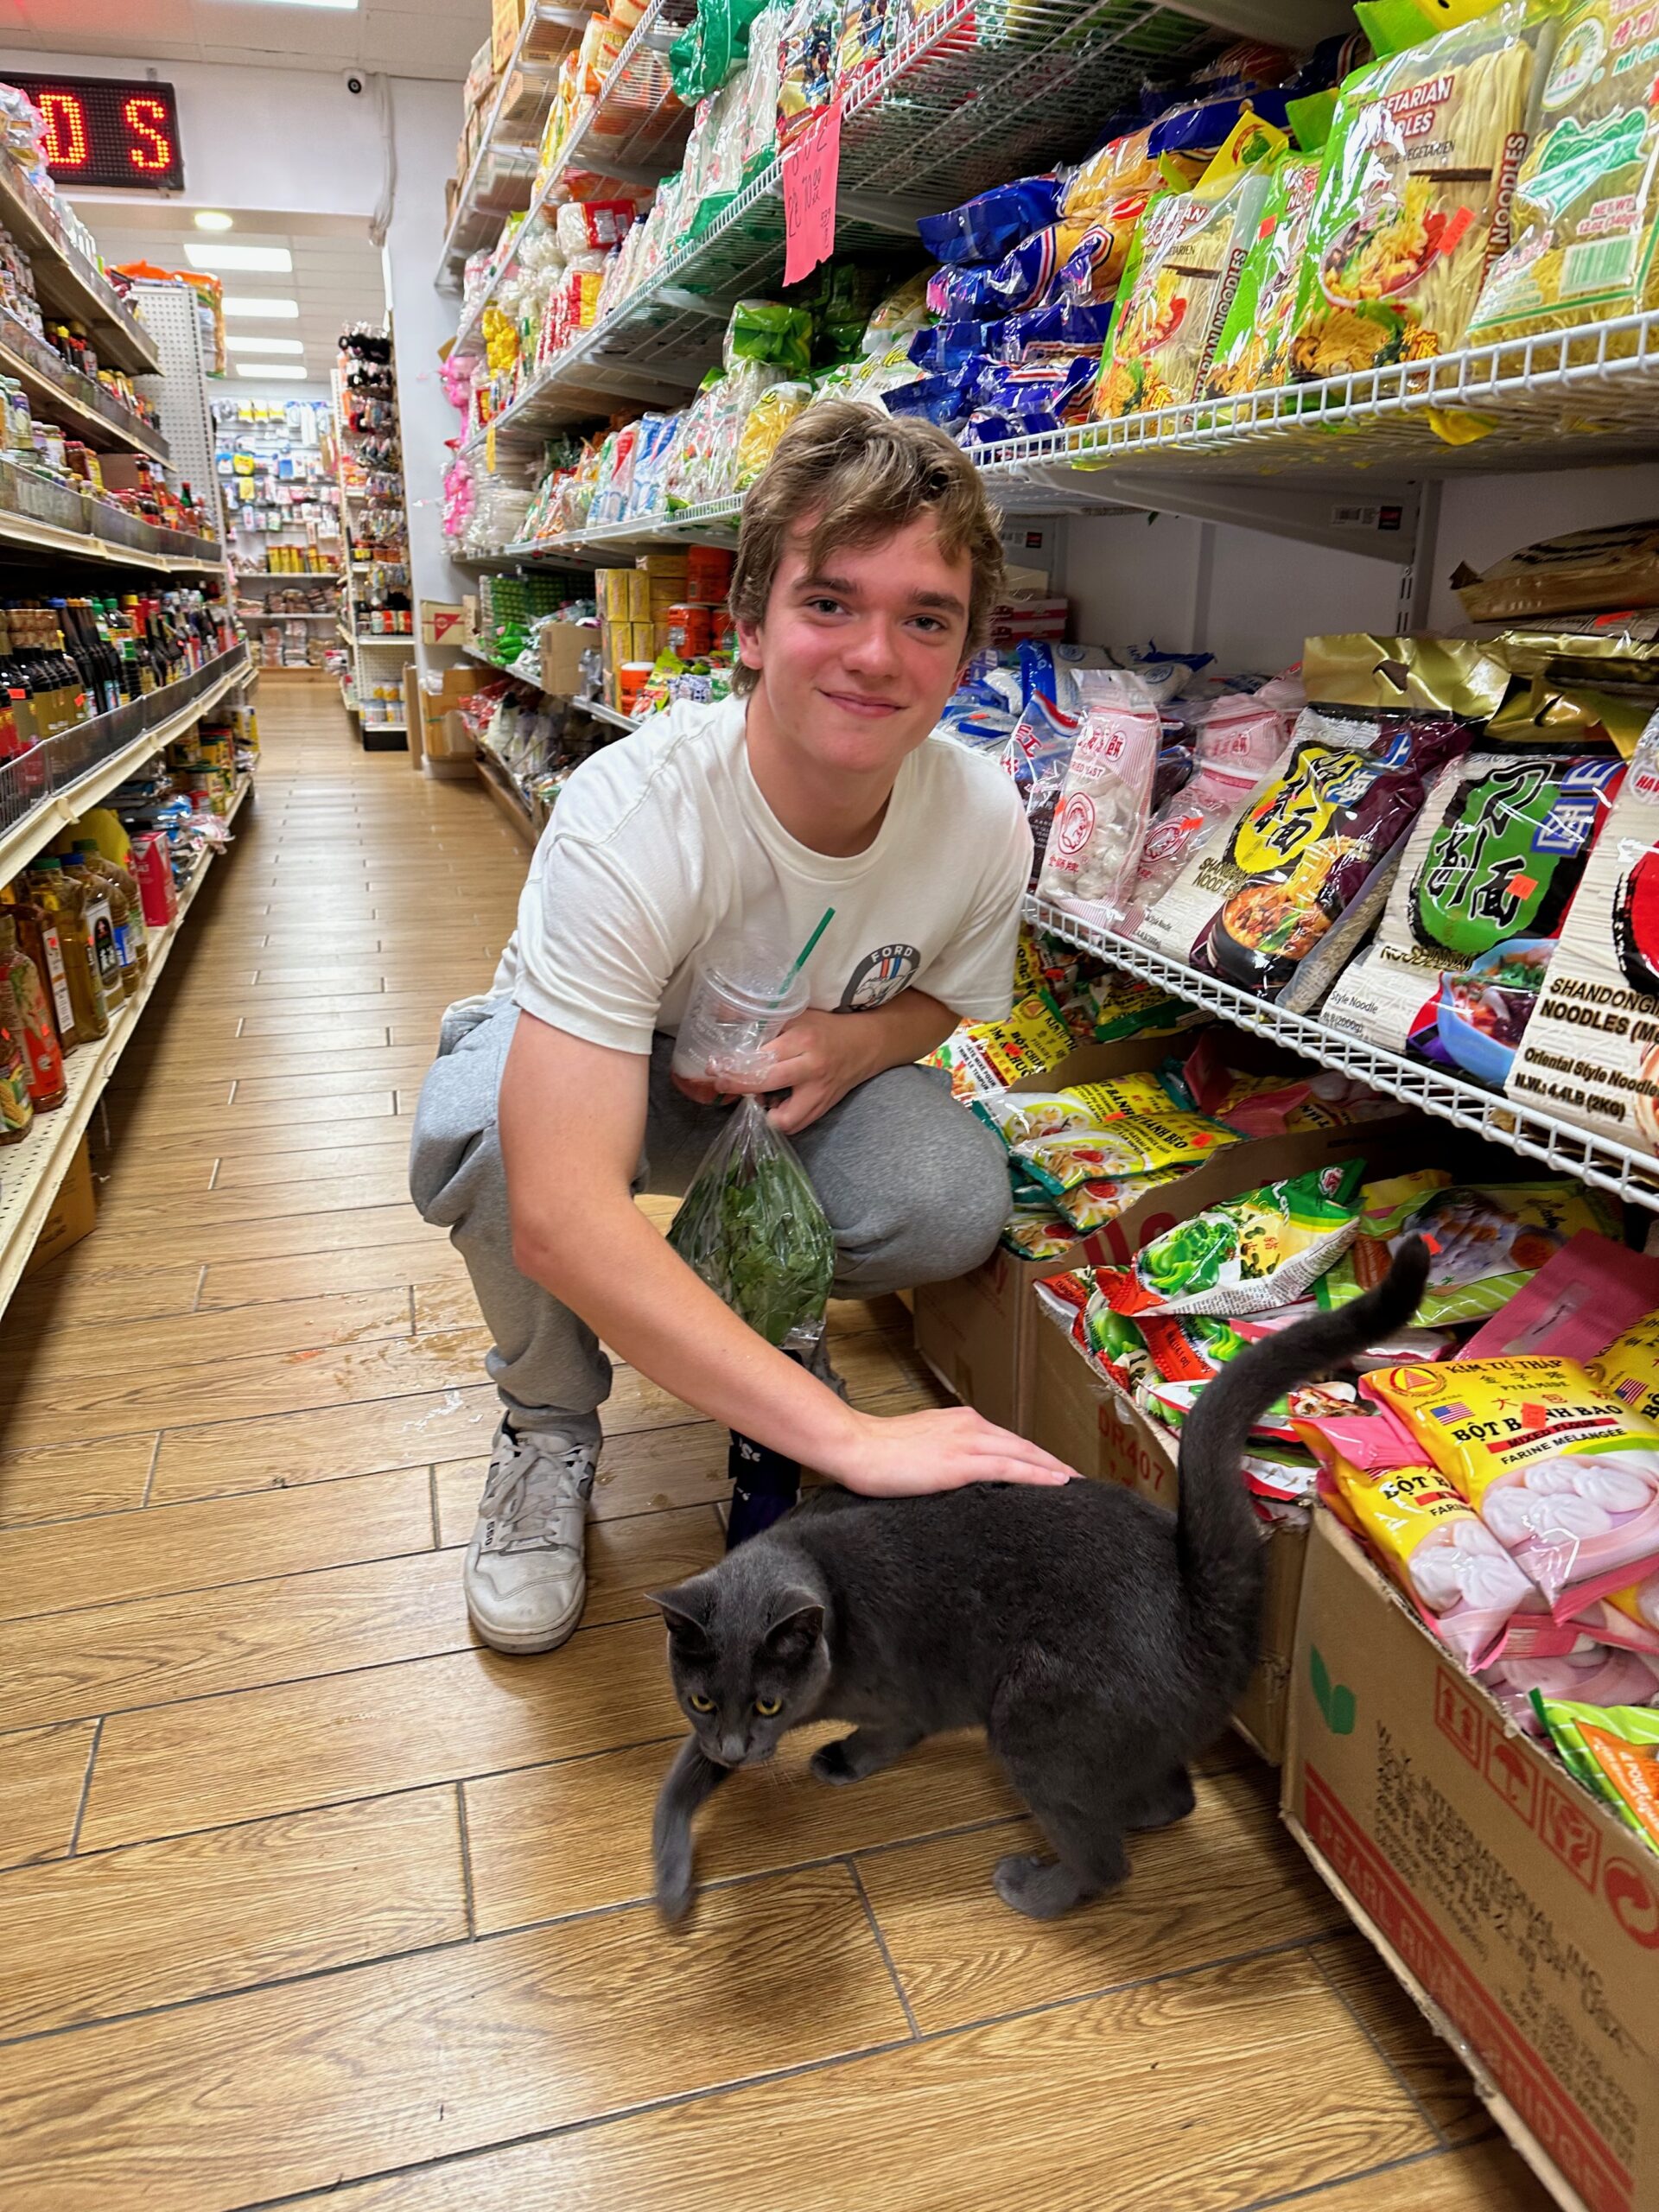 A male-presenting college student pets a cat in a market in Chinatown, New York City.